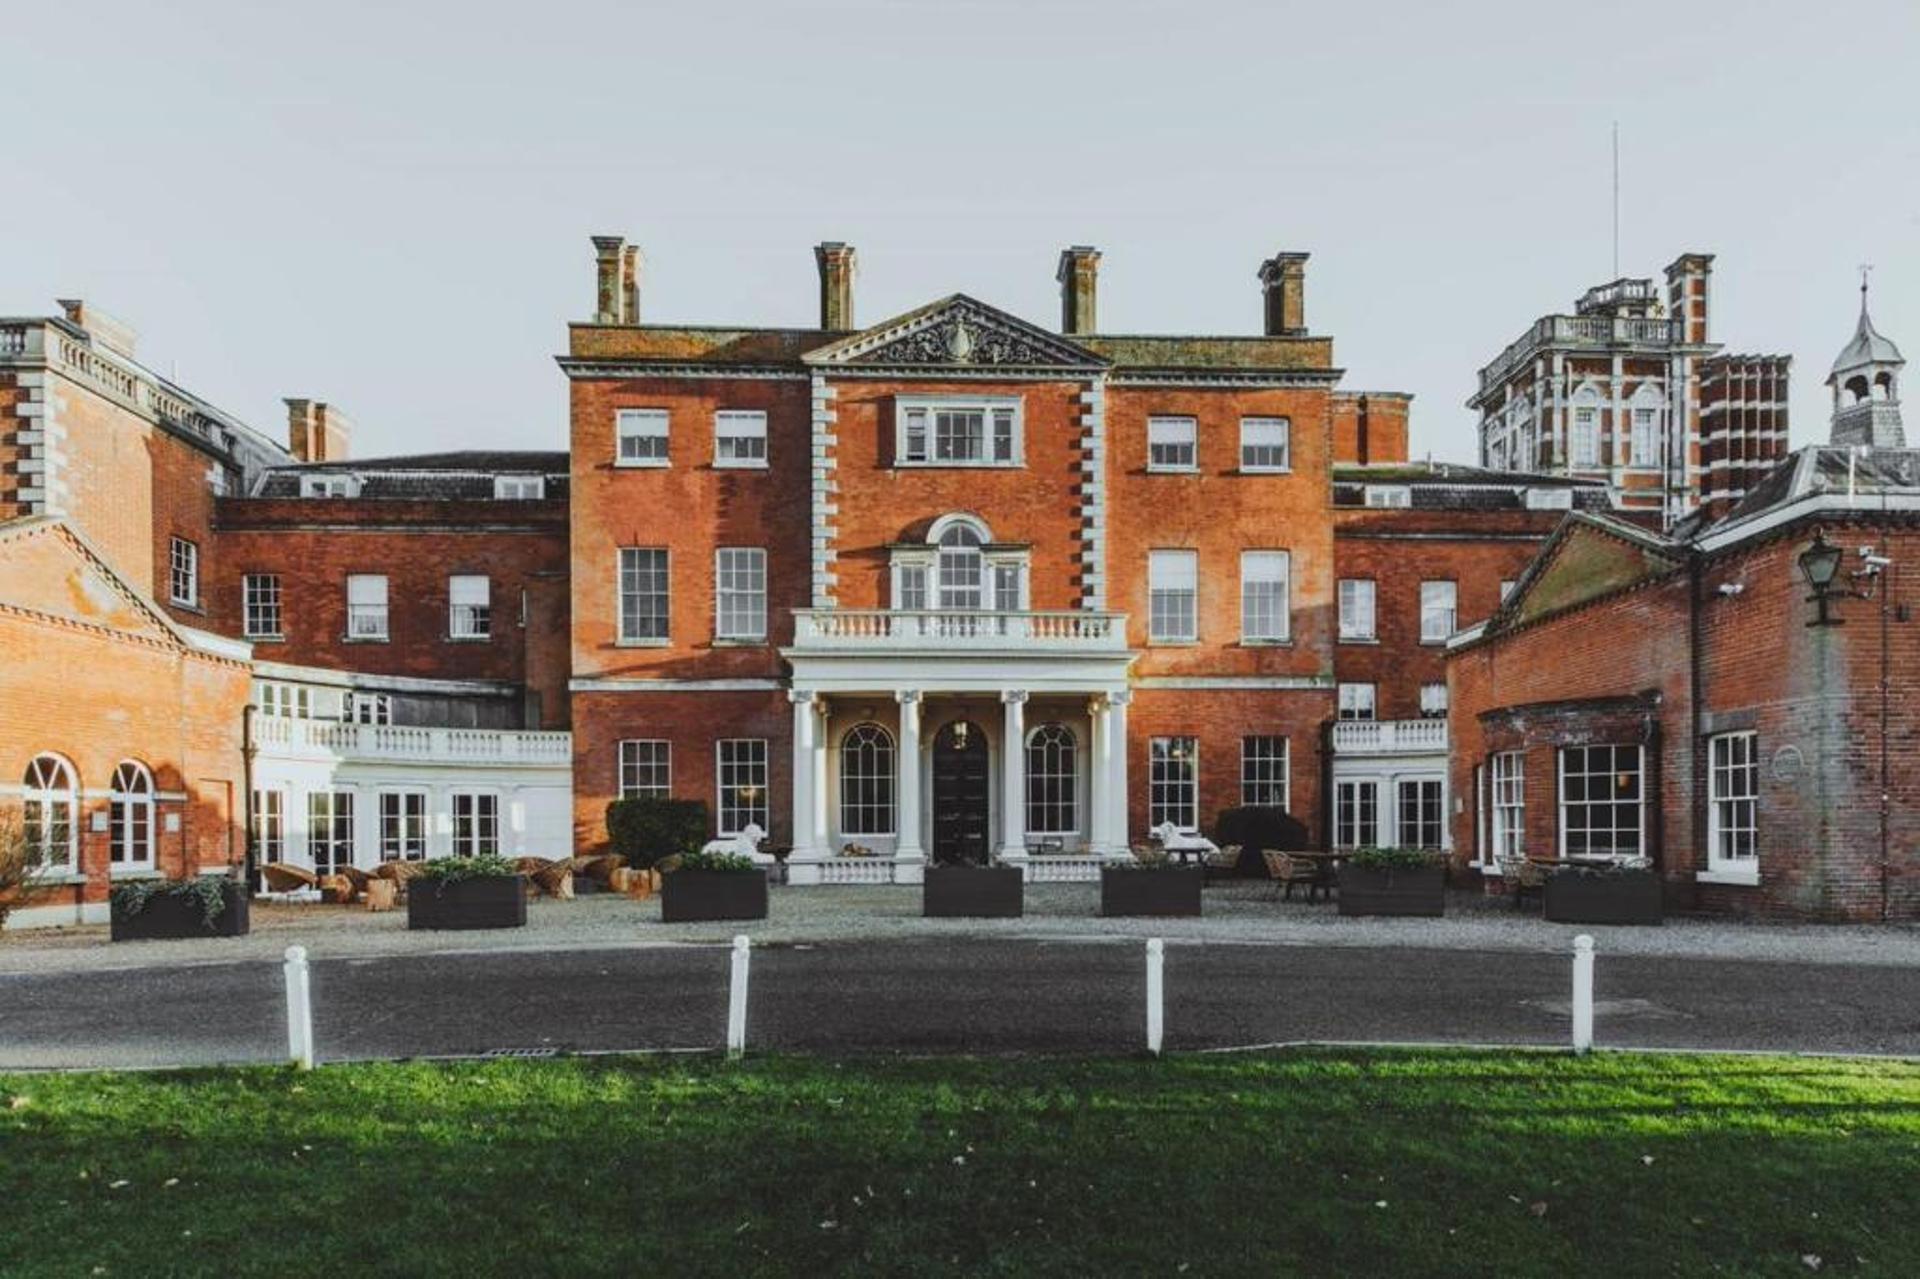 Birch hotels in Hertfordshire and Croydon fall into administration